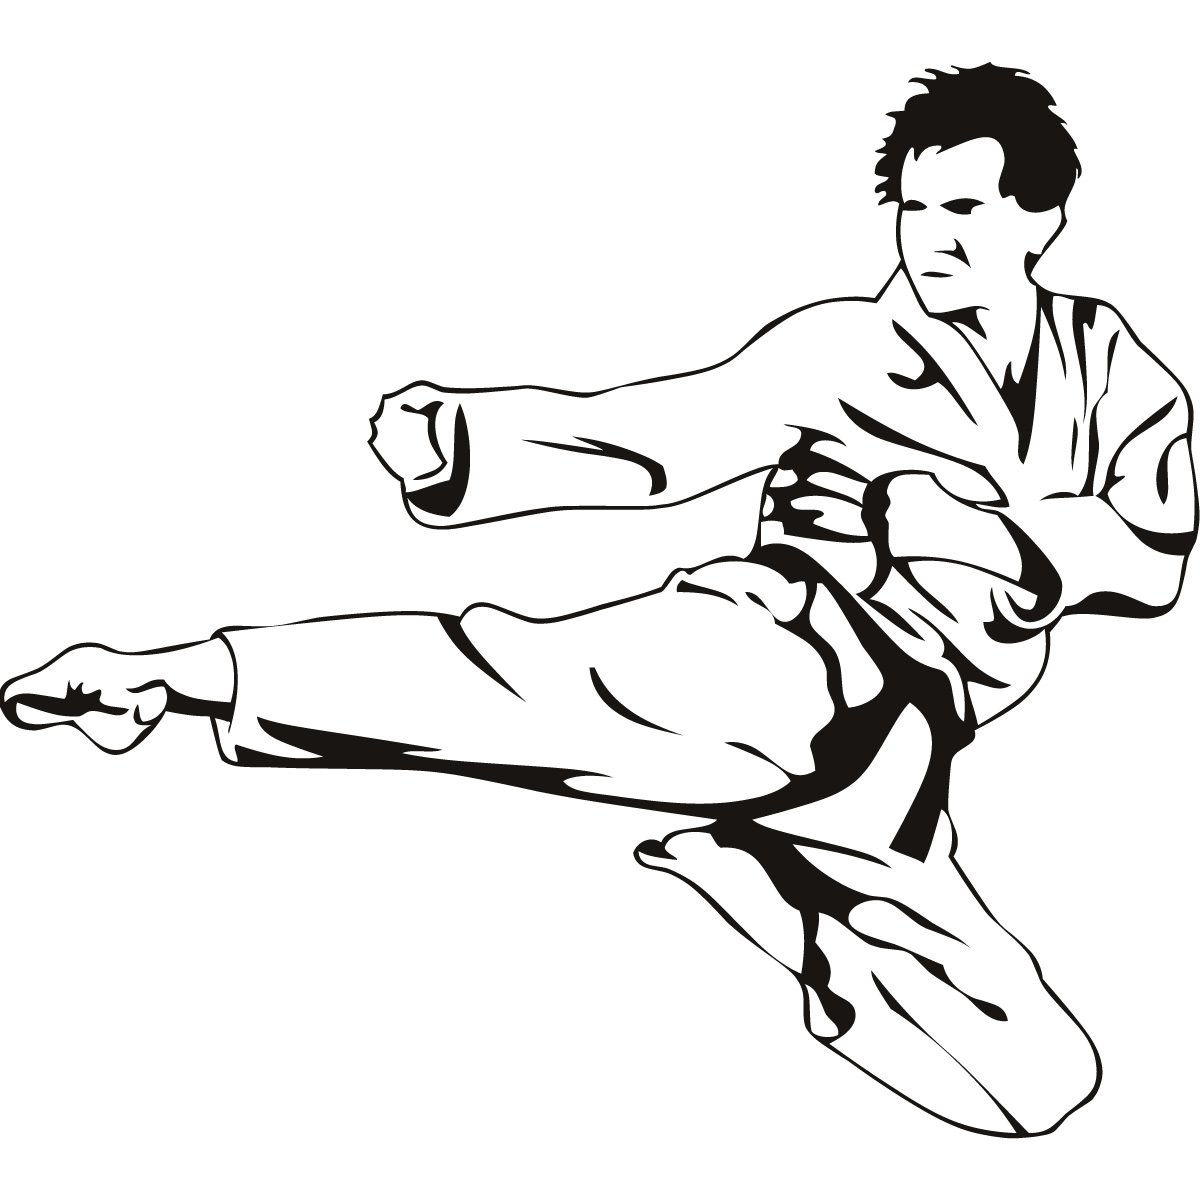 Karate Fighters Drawings - ClipArt Best